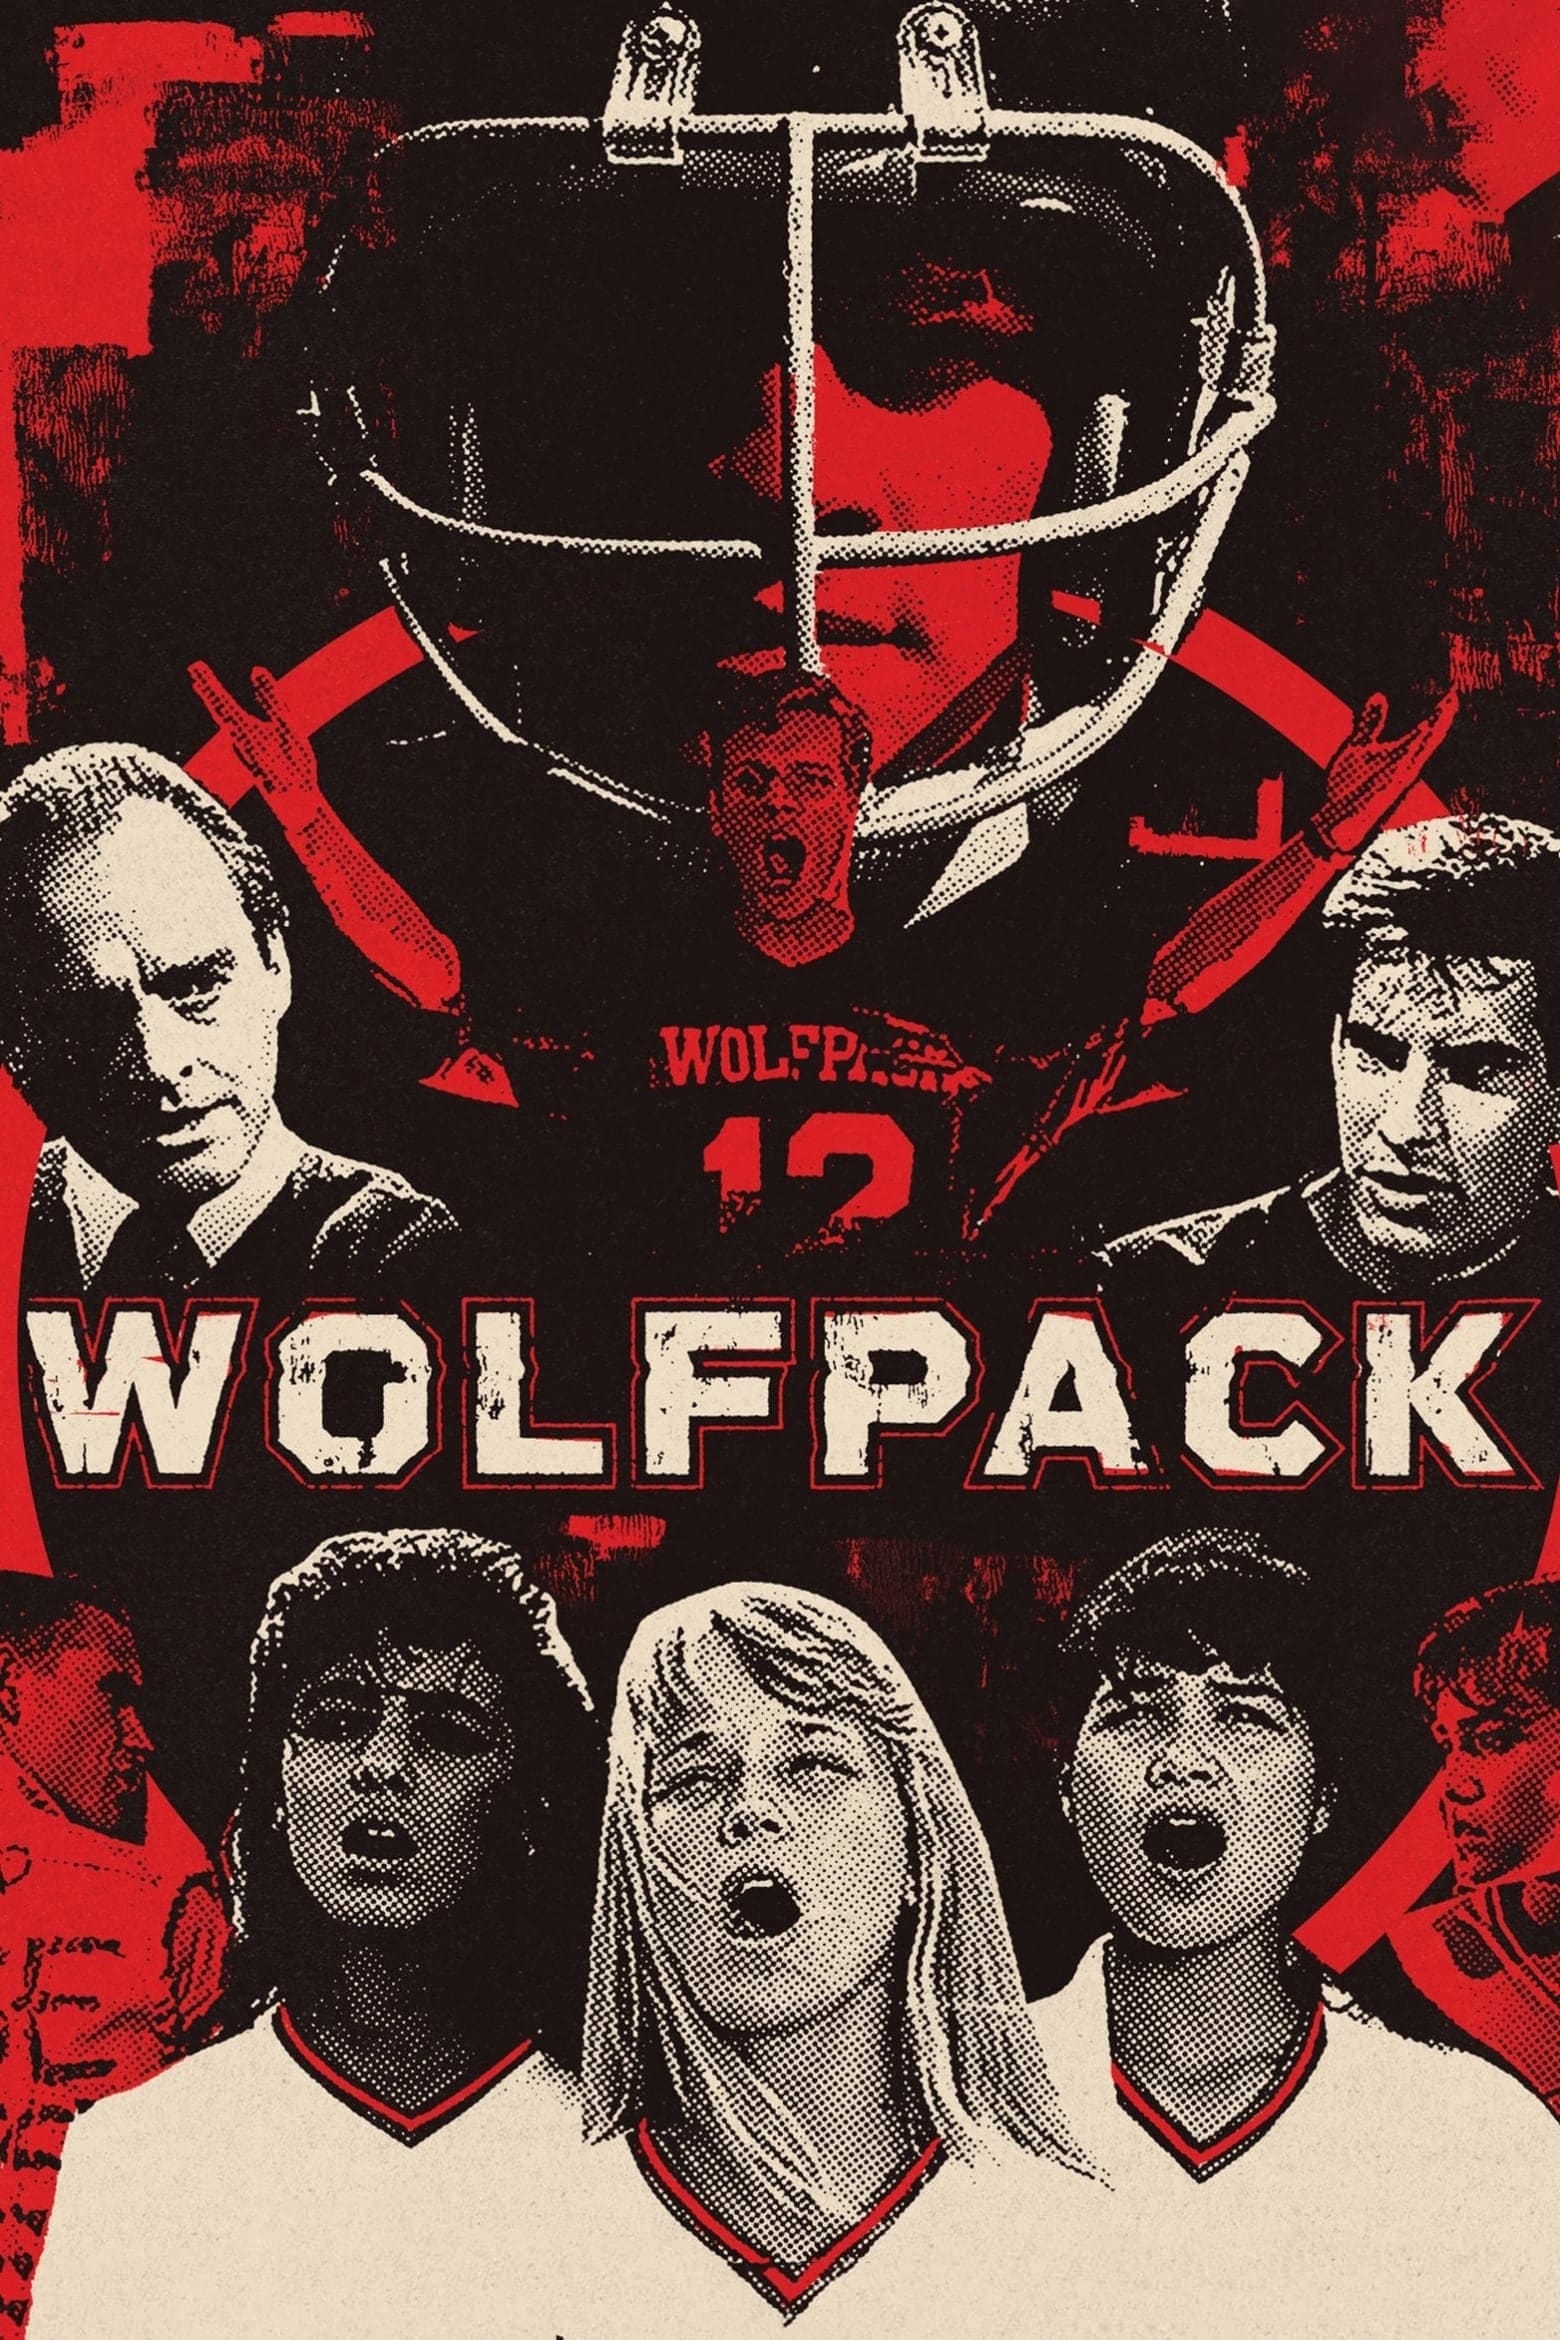 Wolfpack (1988)